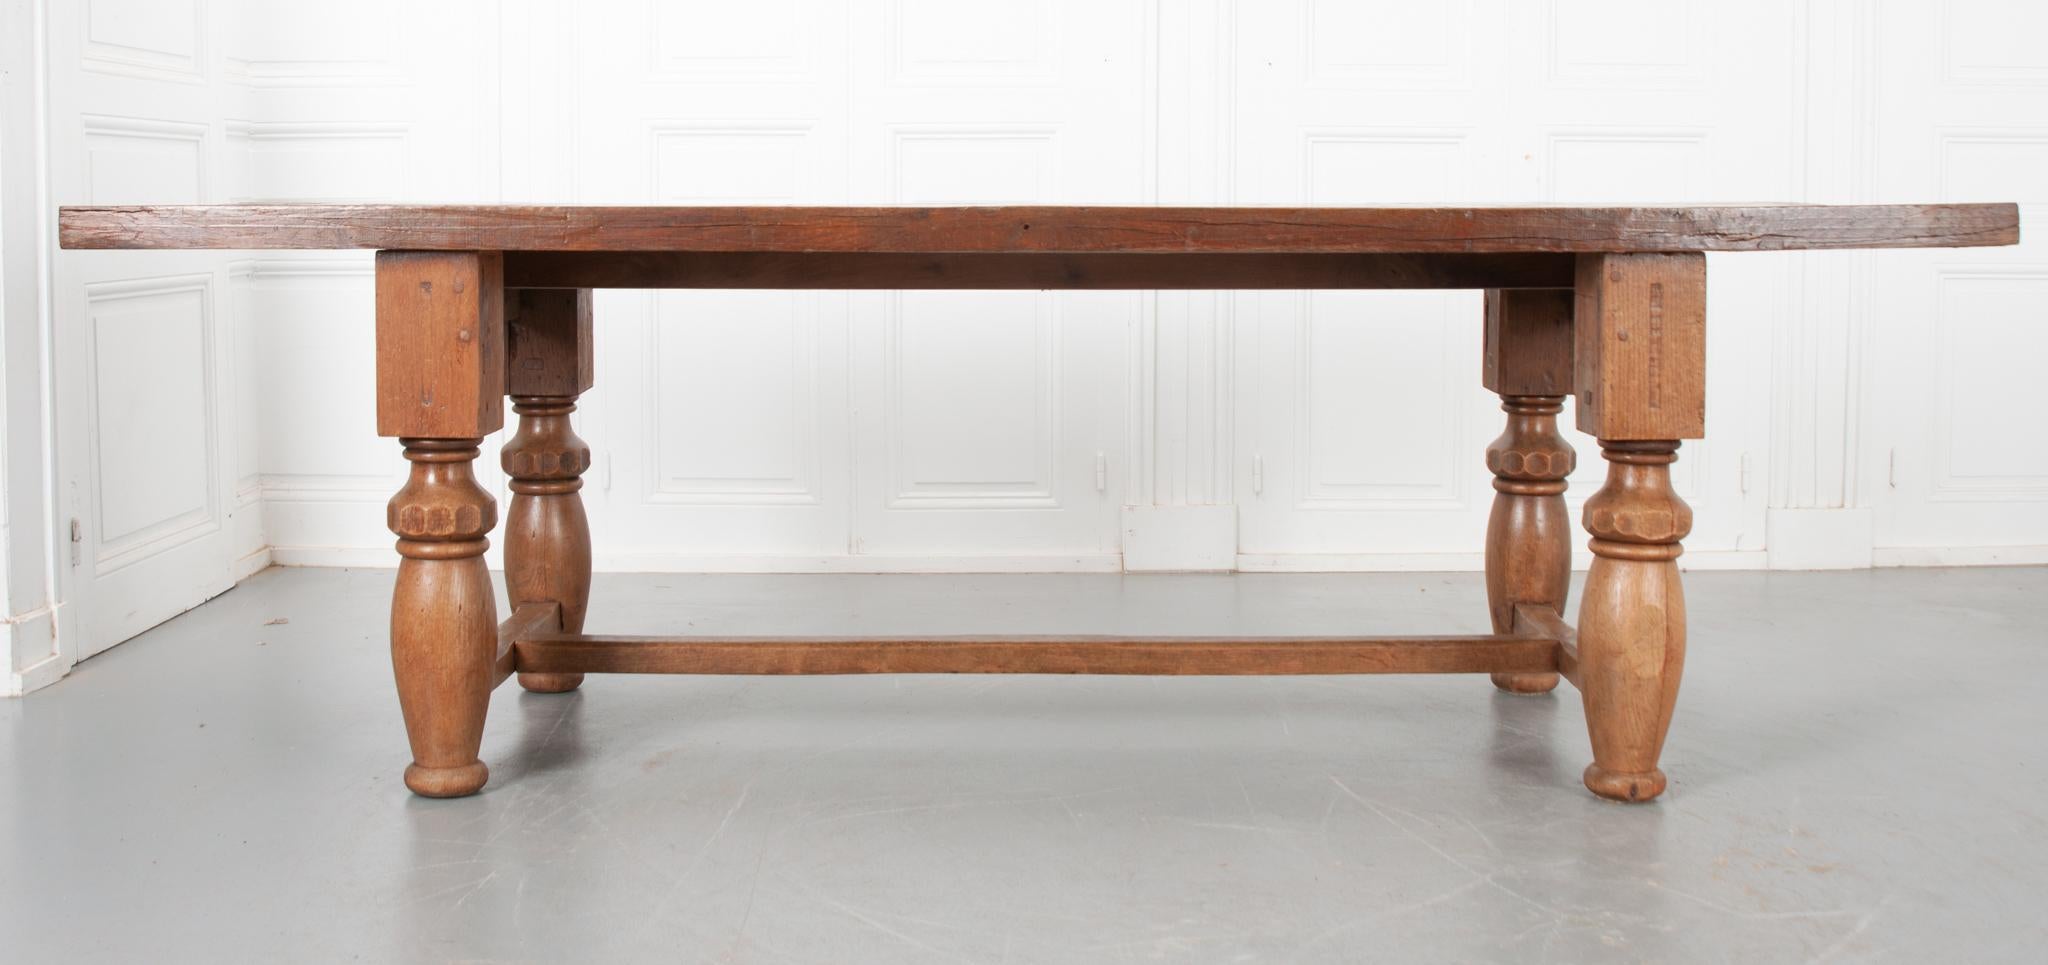 French 19th Century Refectory-Style Oak Farmhouse Table For Sale 5